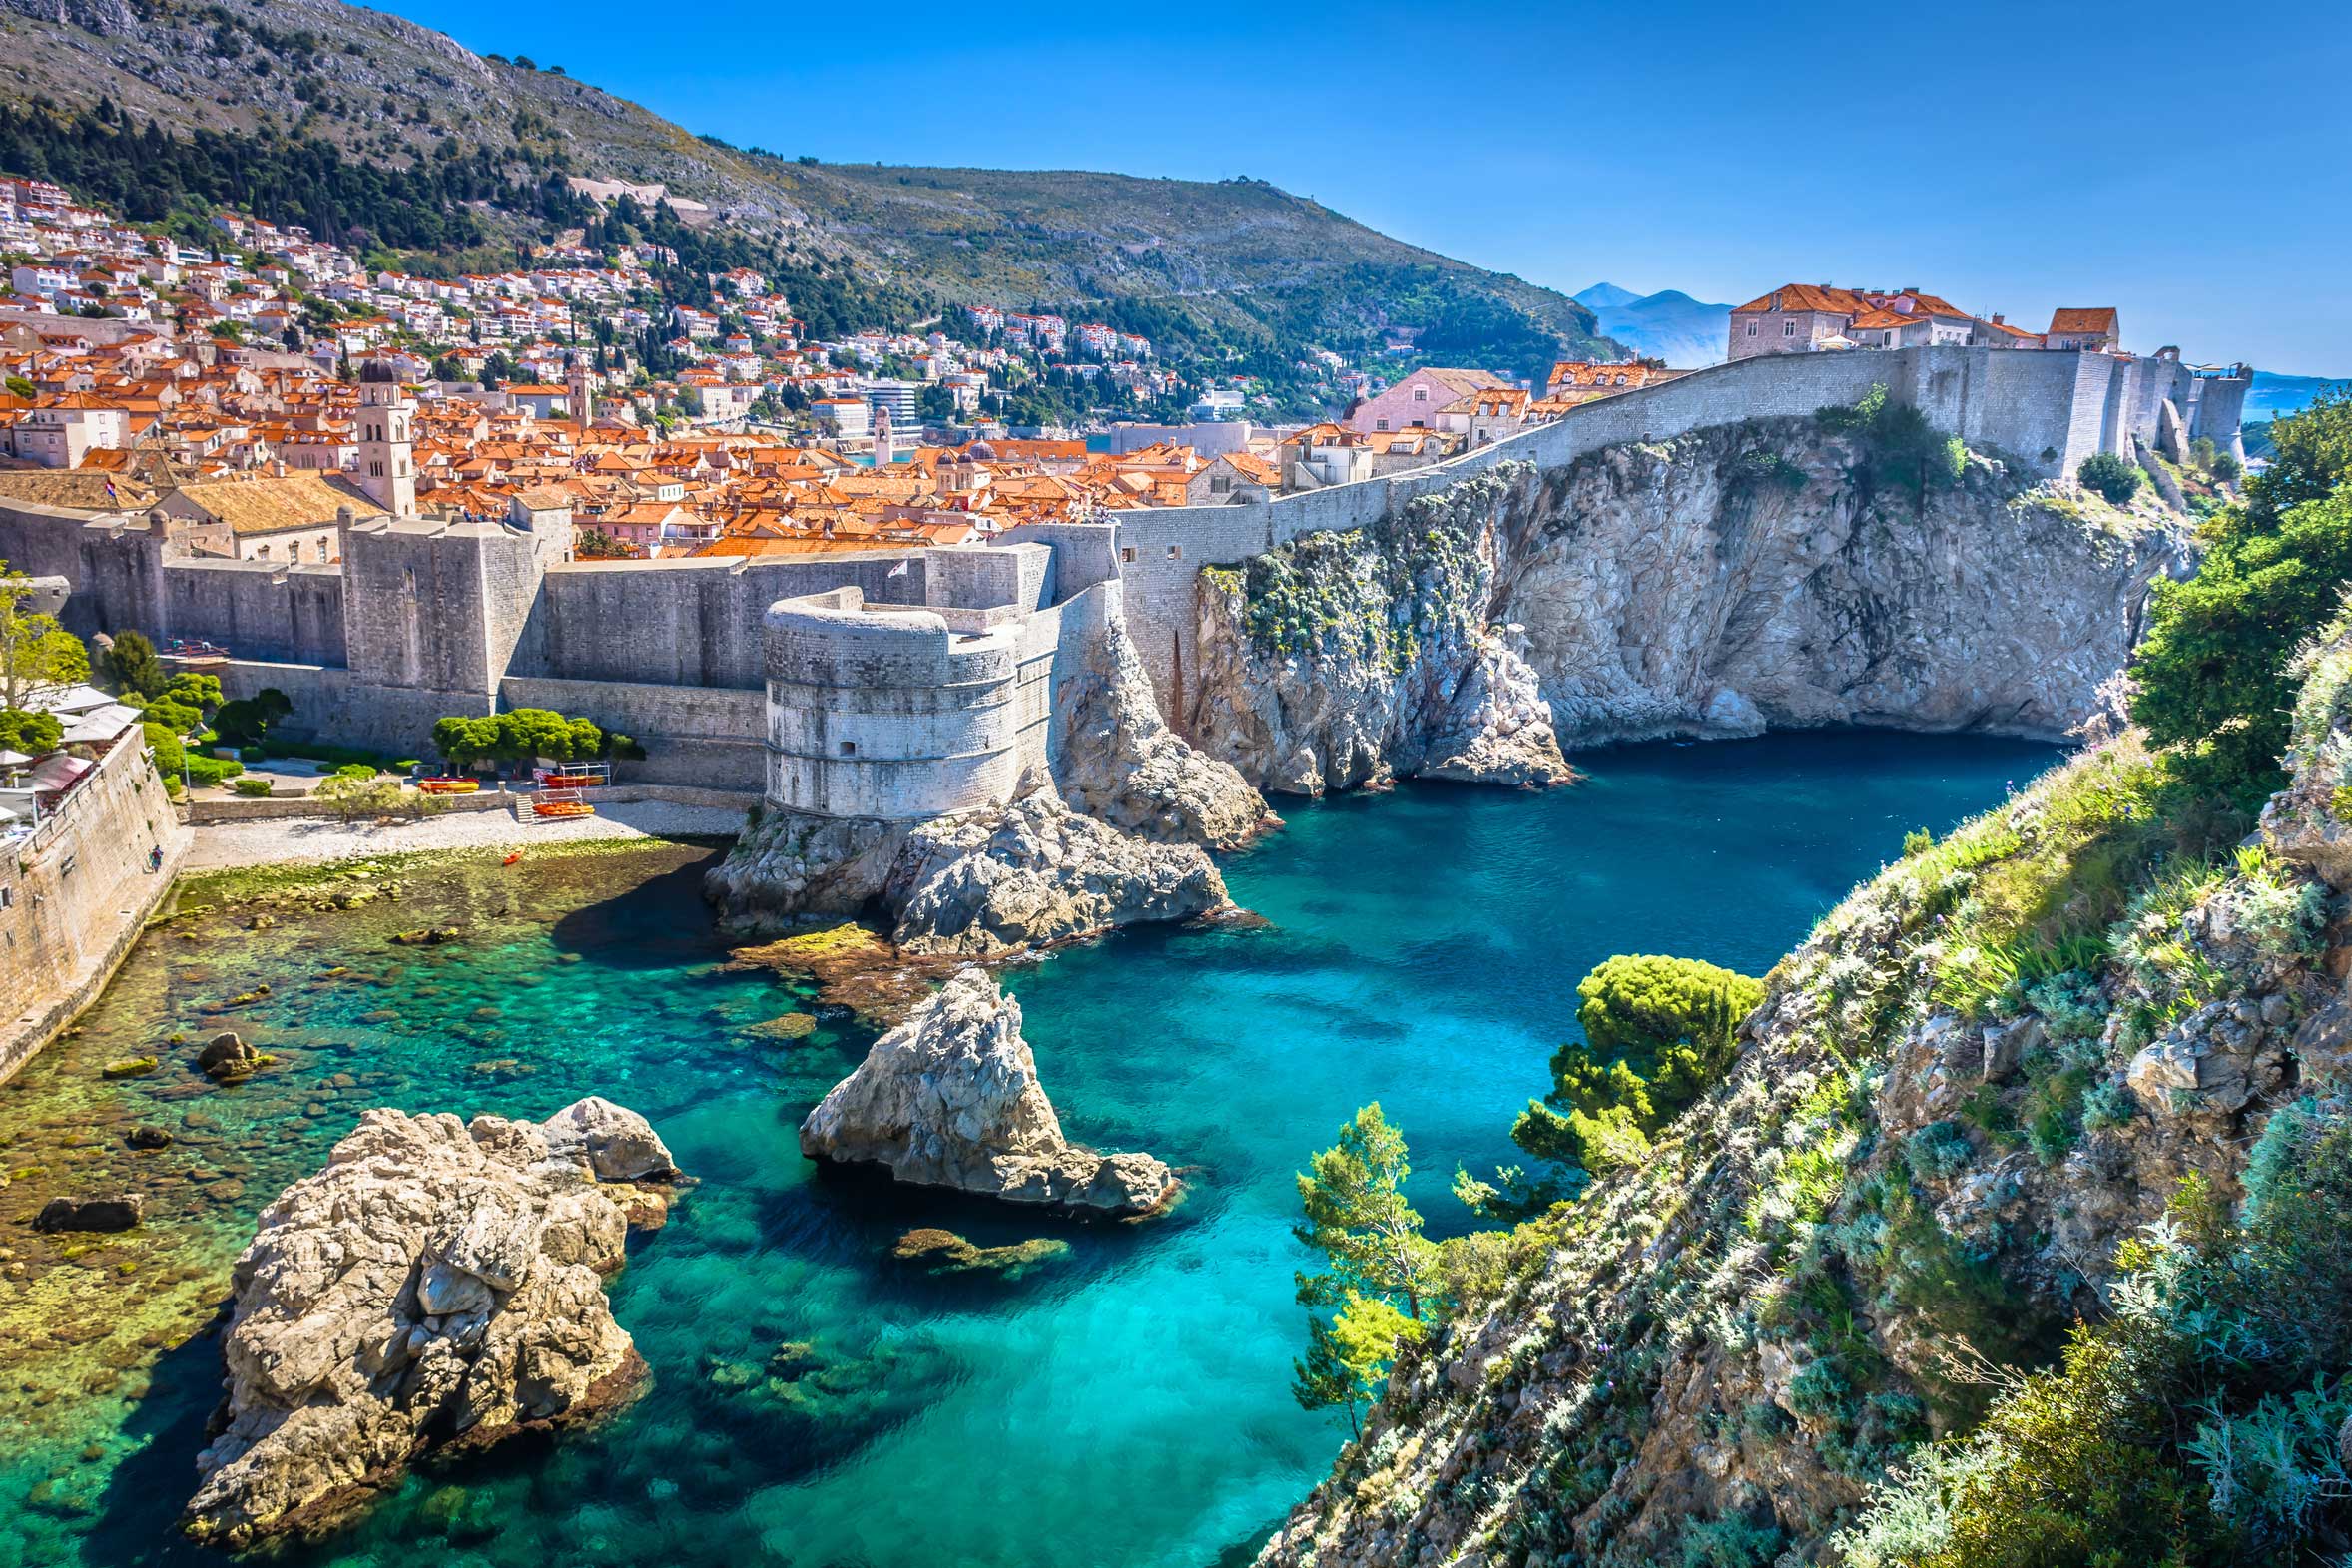 Picture of Dubrovnik's Old Town walls from the sea.